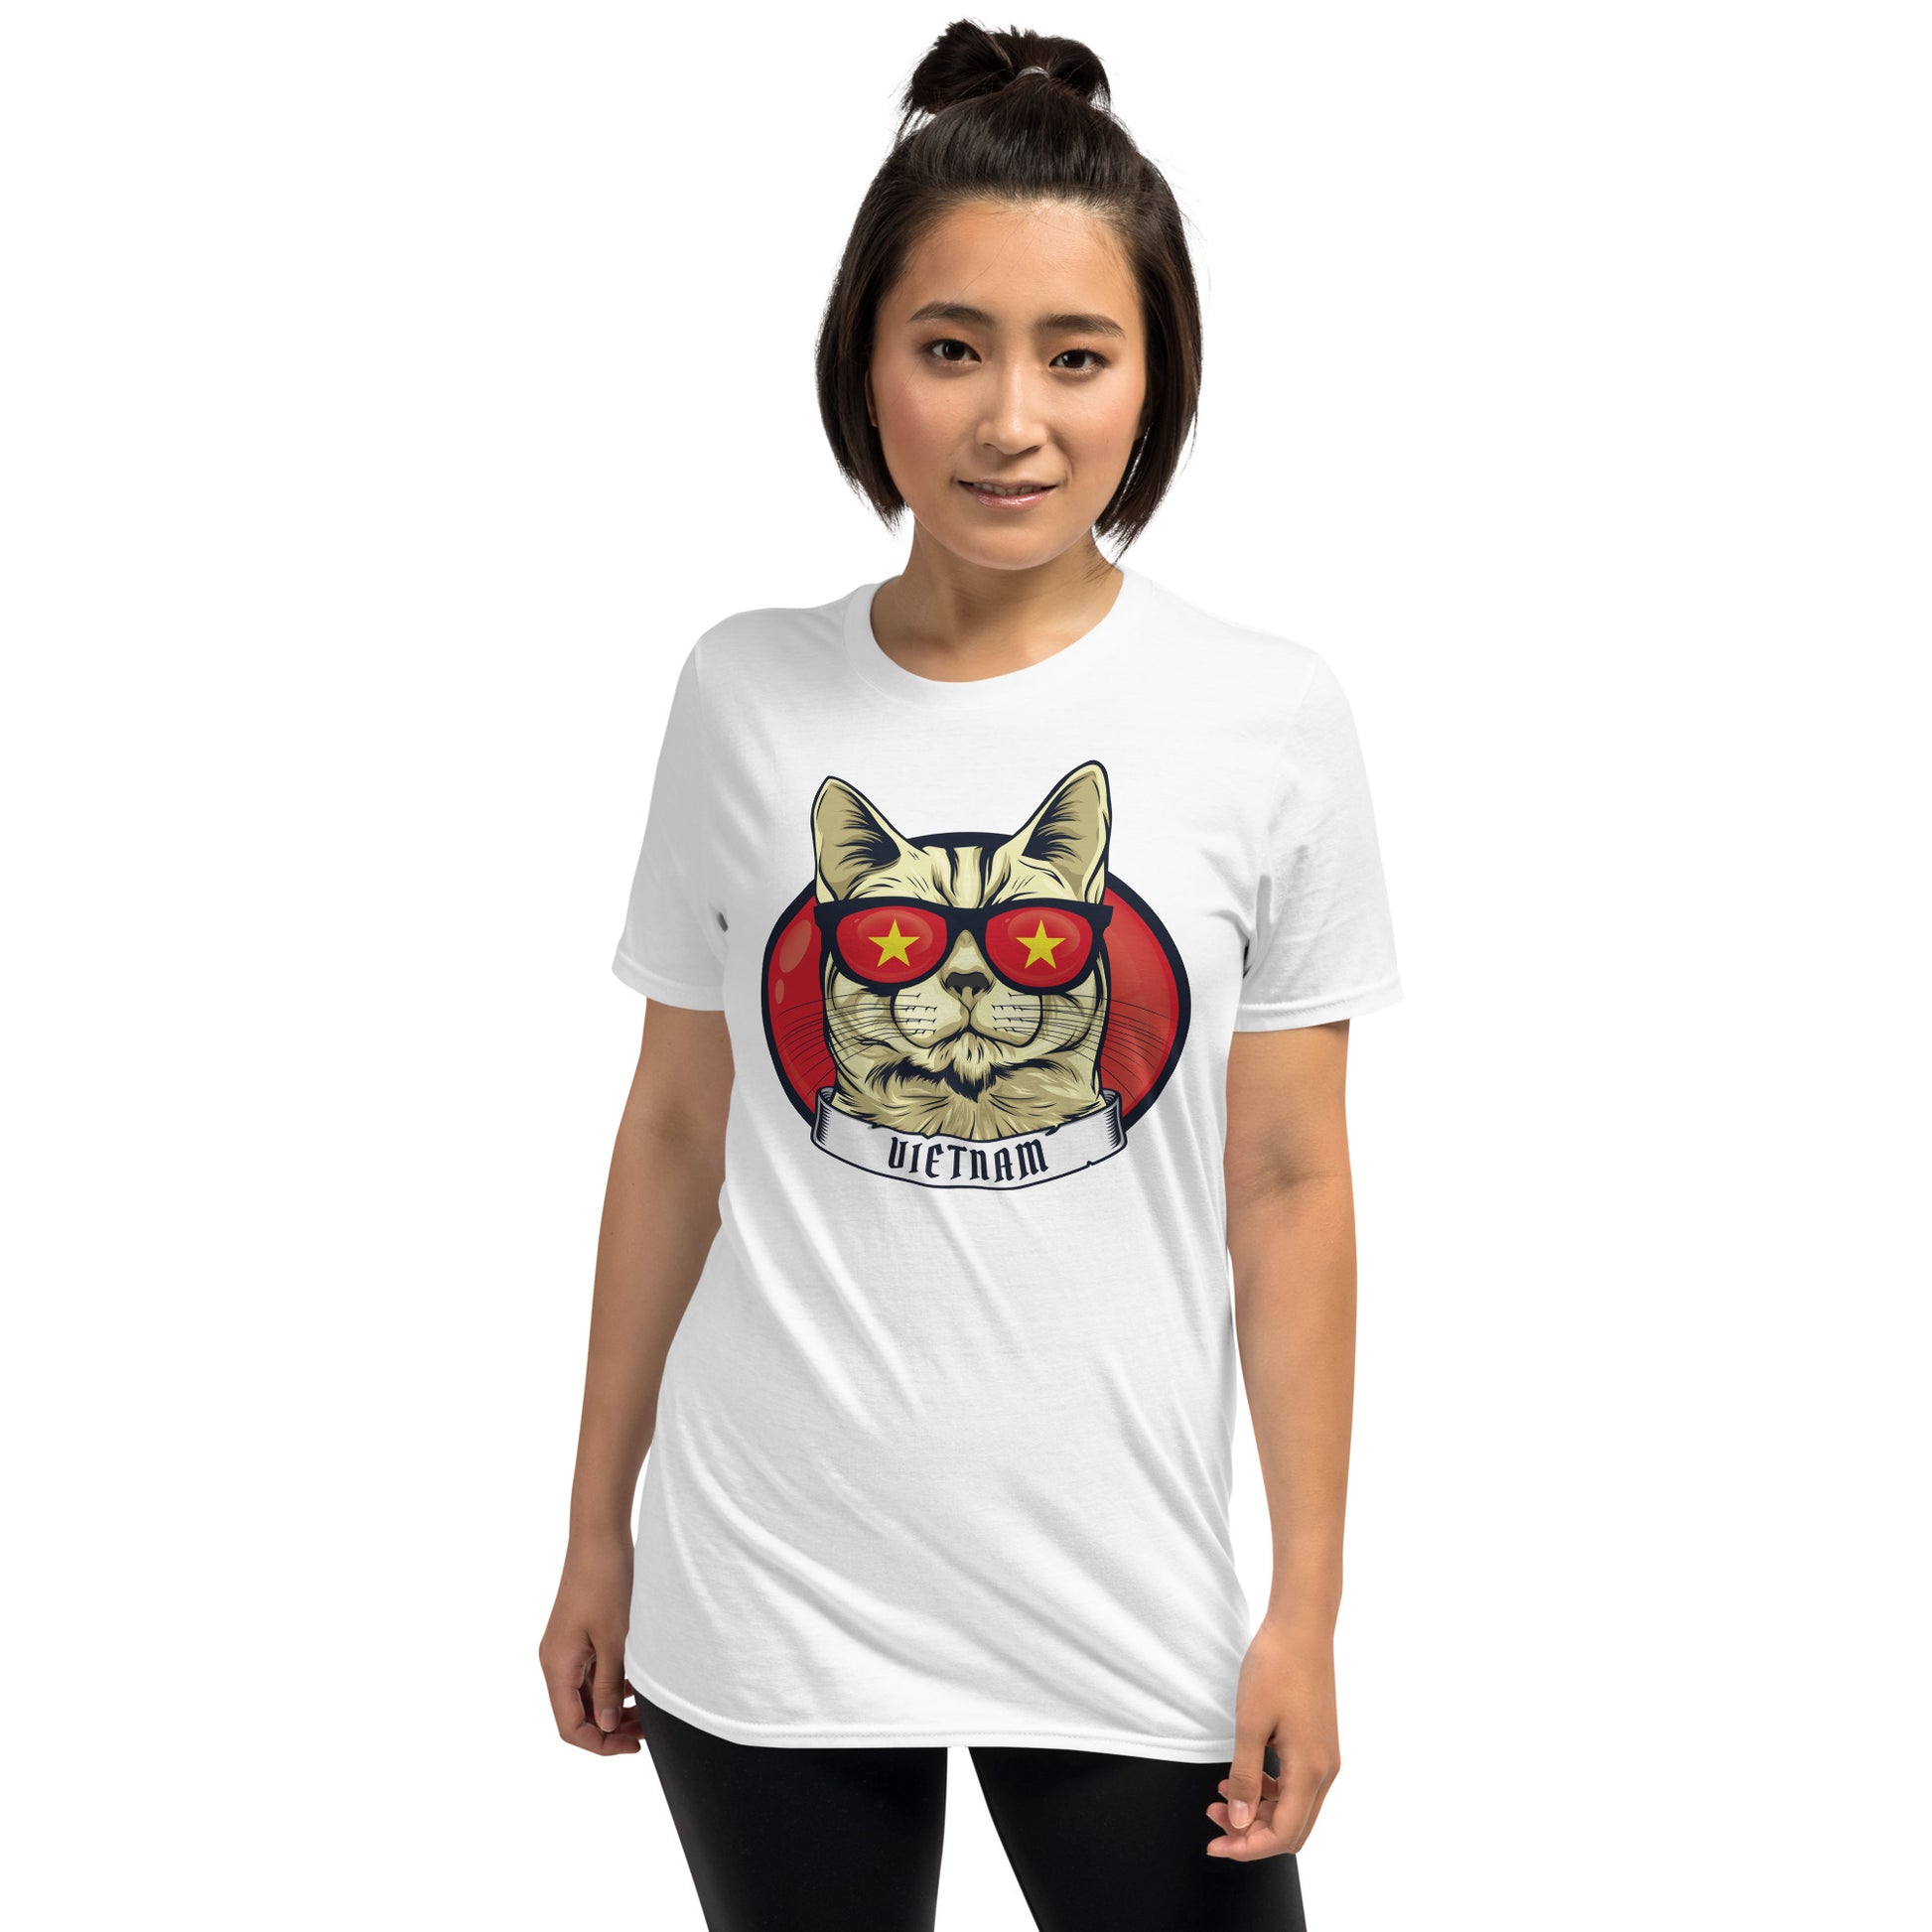 T-shirt with Vietnamese Flag Design and Cute Cat